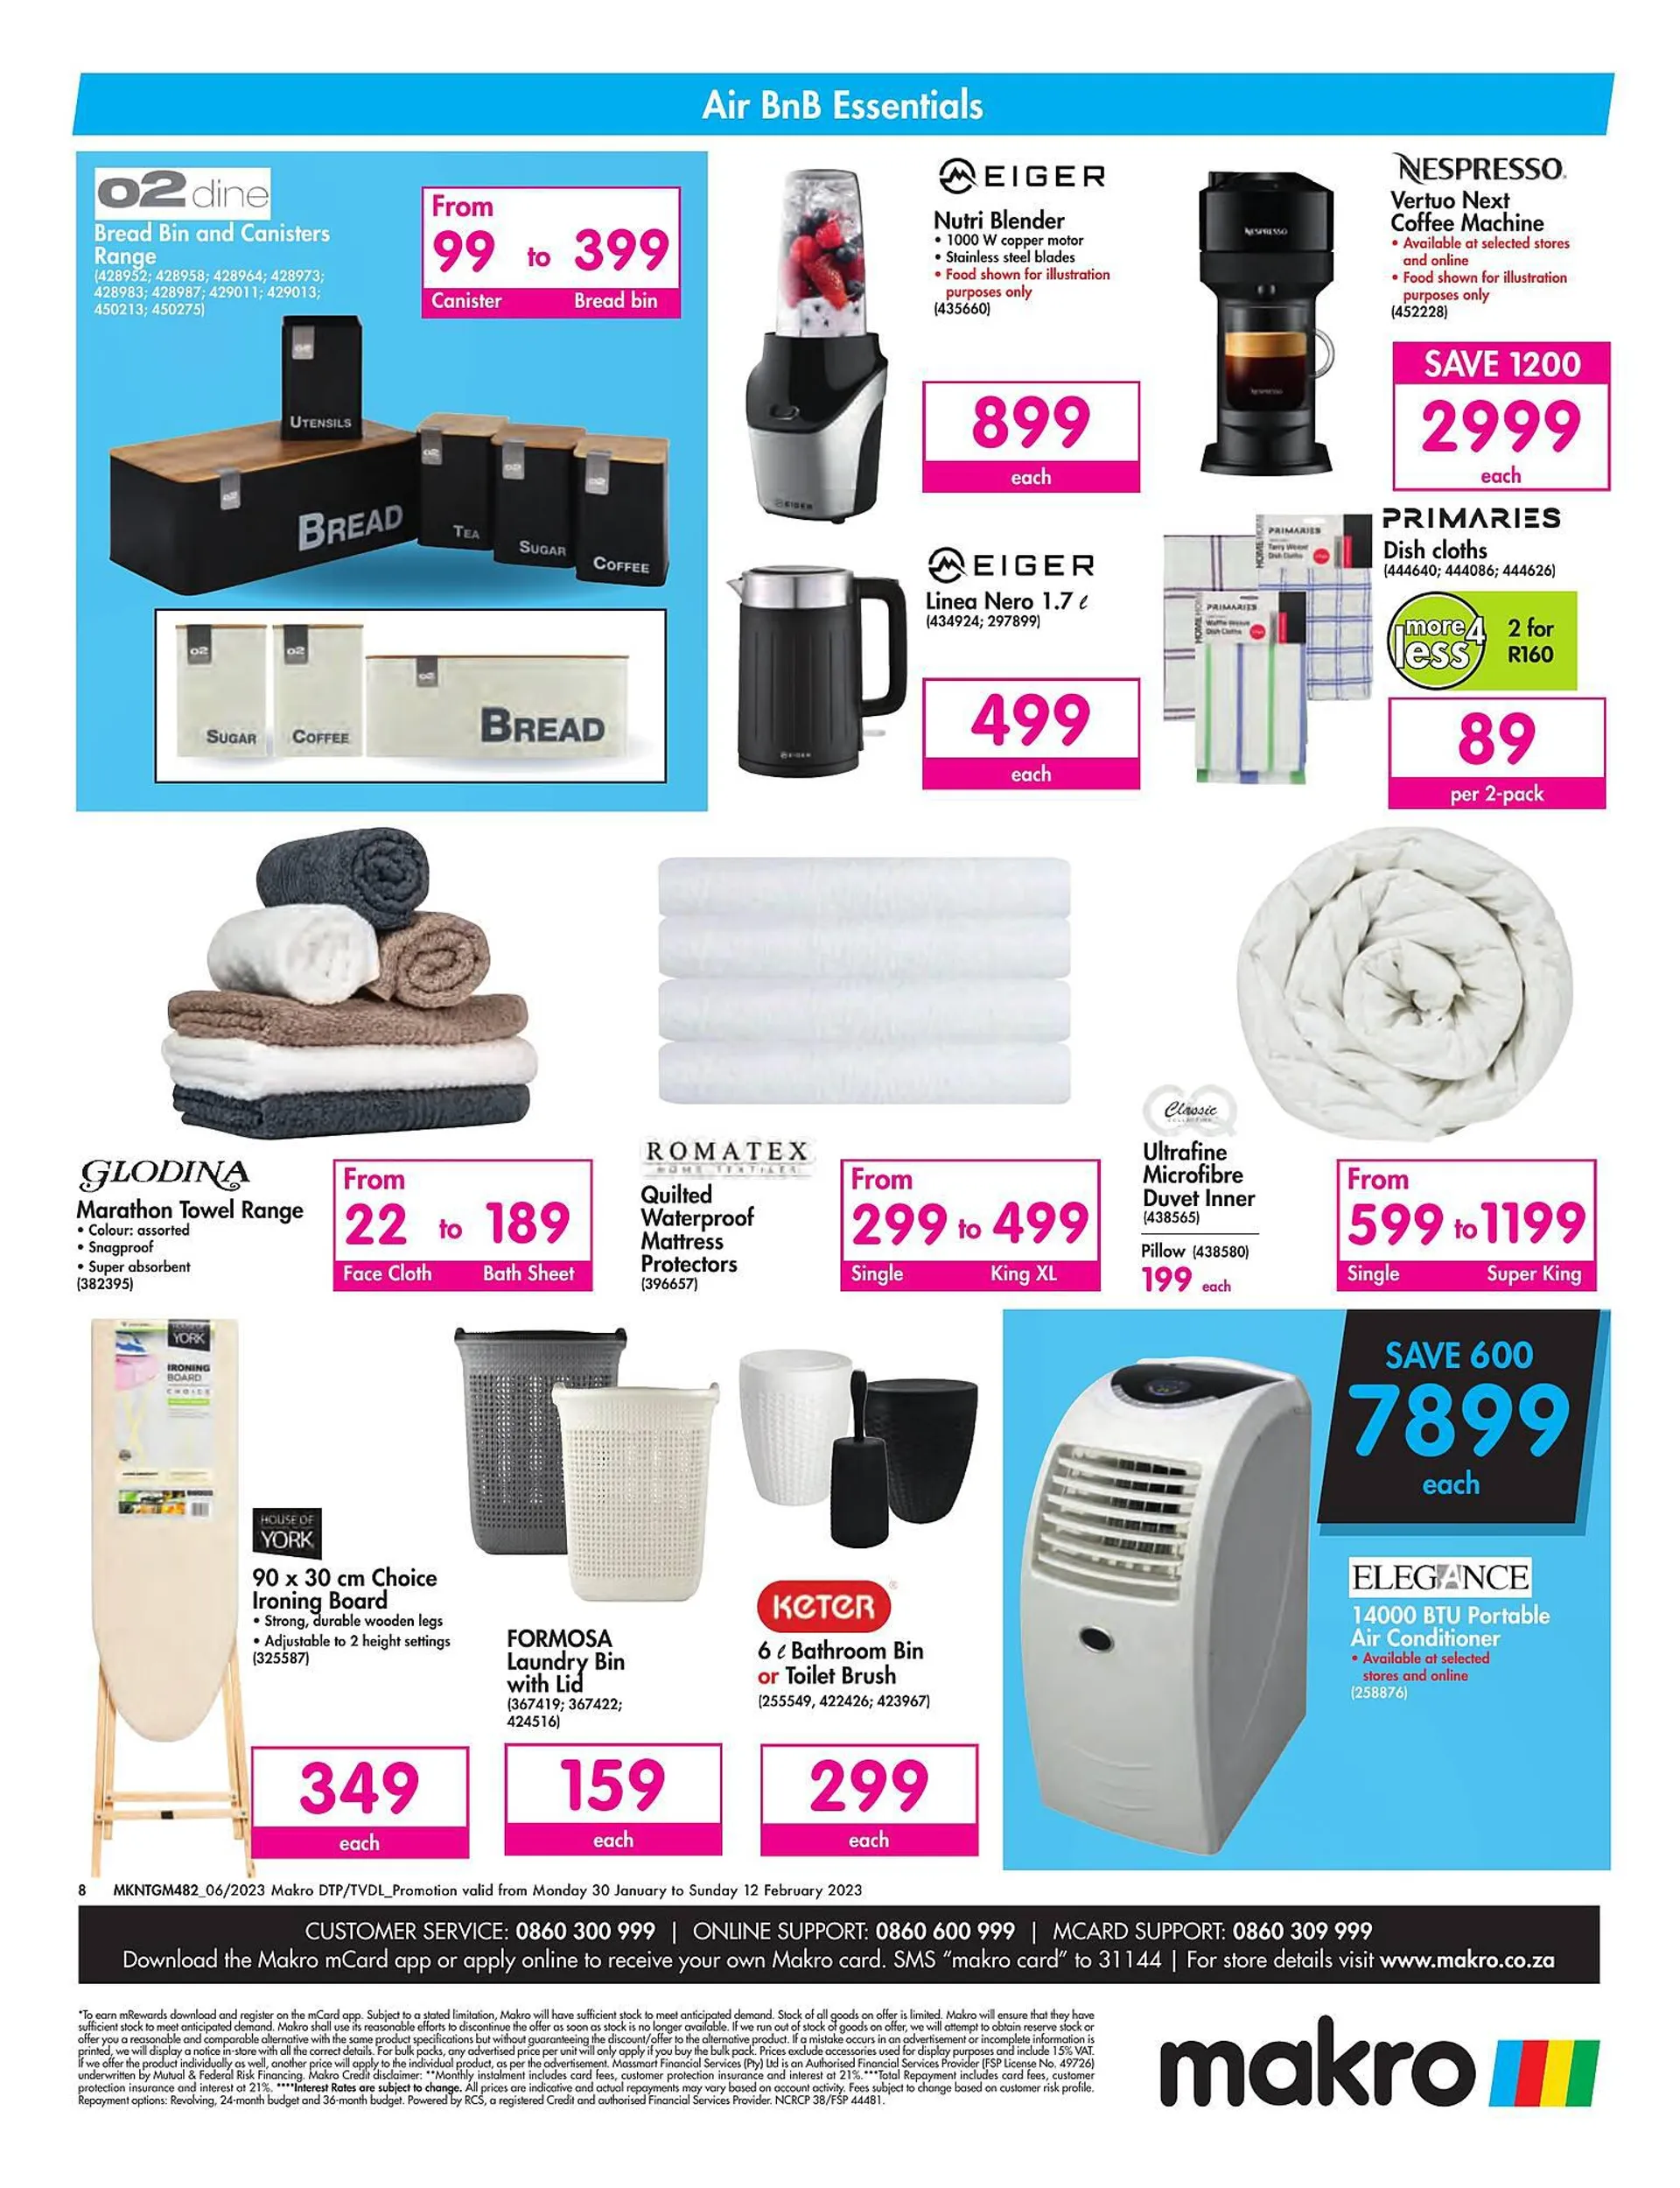 Makro catalogue - Catering - 8